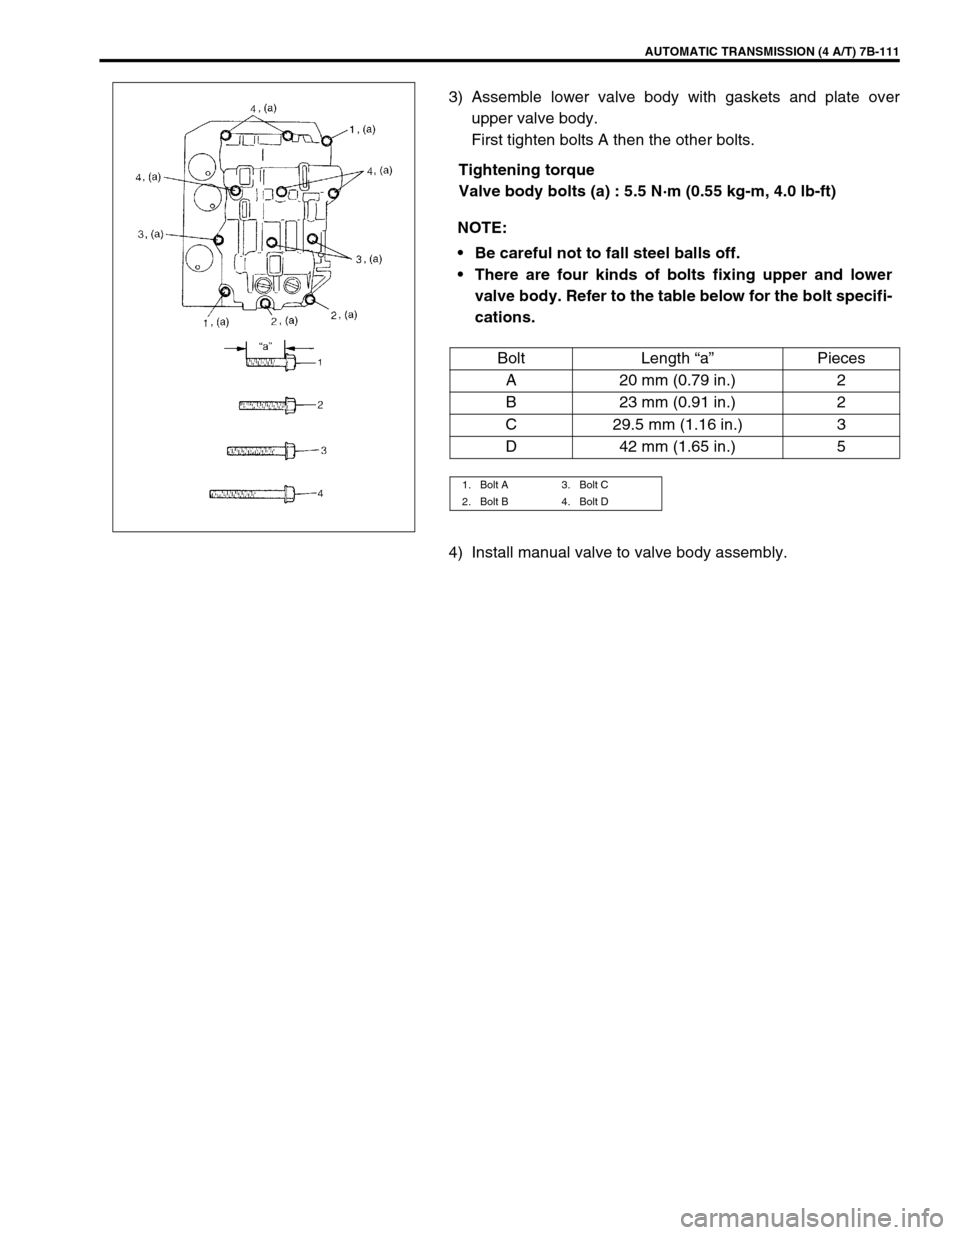 SUZUKI SWIFT 2000 1.G Transmission Service Workshop Manual AUTOMATIC TRANSMISSION (4 A/T) 7B-111
3) Assemble lower valve body with gaskets and plate over
upper valve body.
First tighten bolts A then the other bolts.
Tightening torque
Valve body bolts (a) : 5.